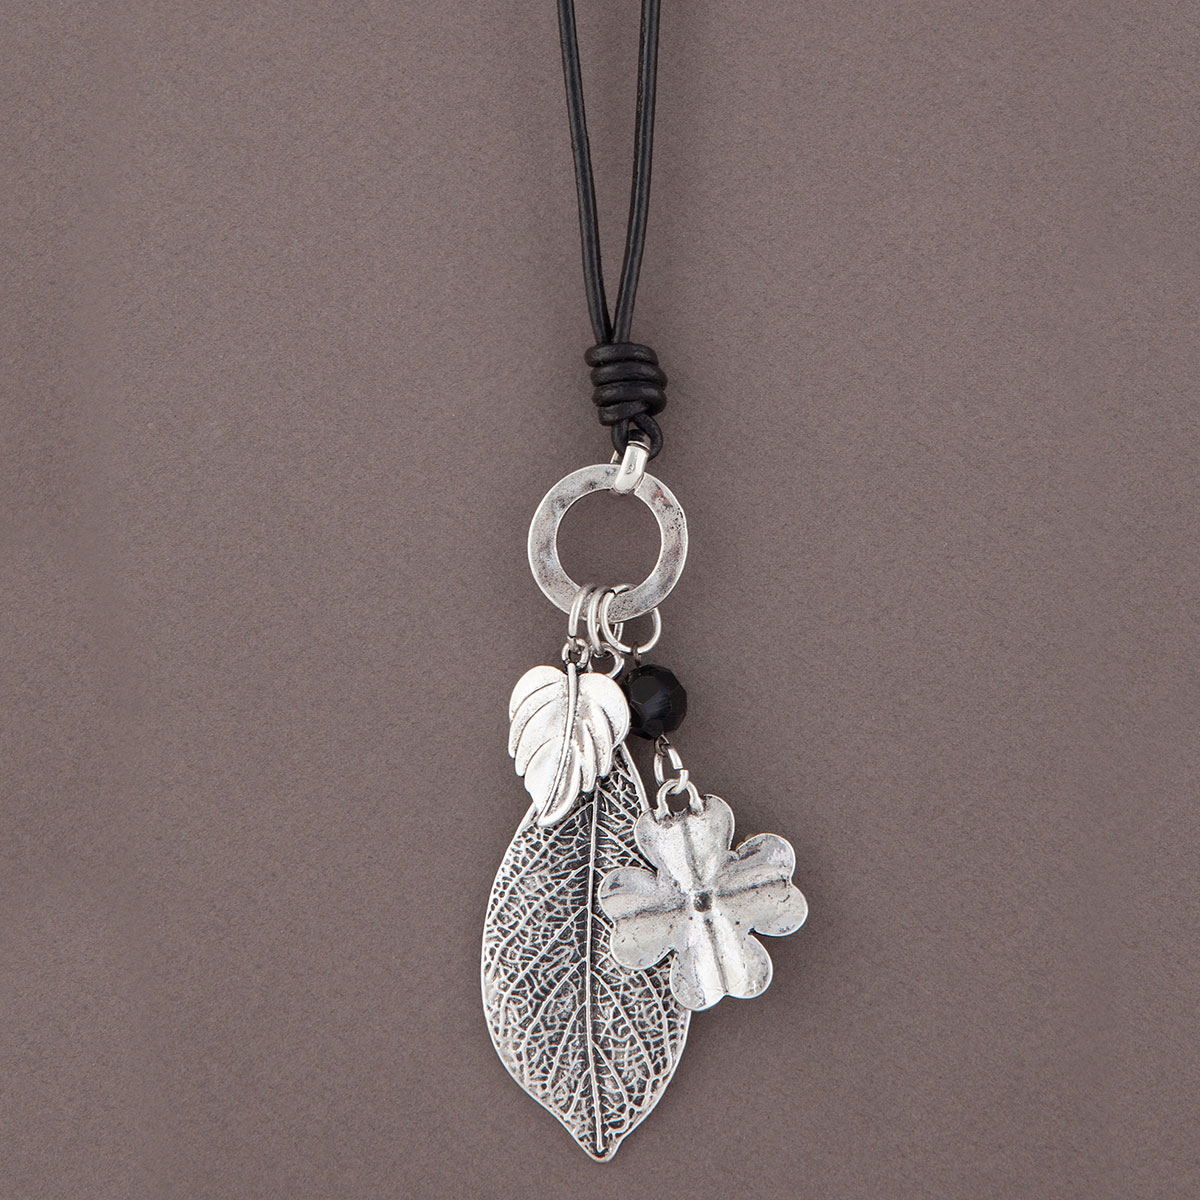 Antique Silver Leaves Dangle on Black Cord Necklace